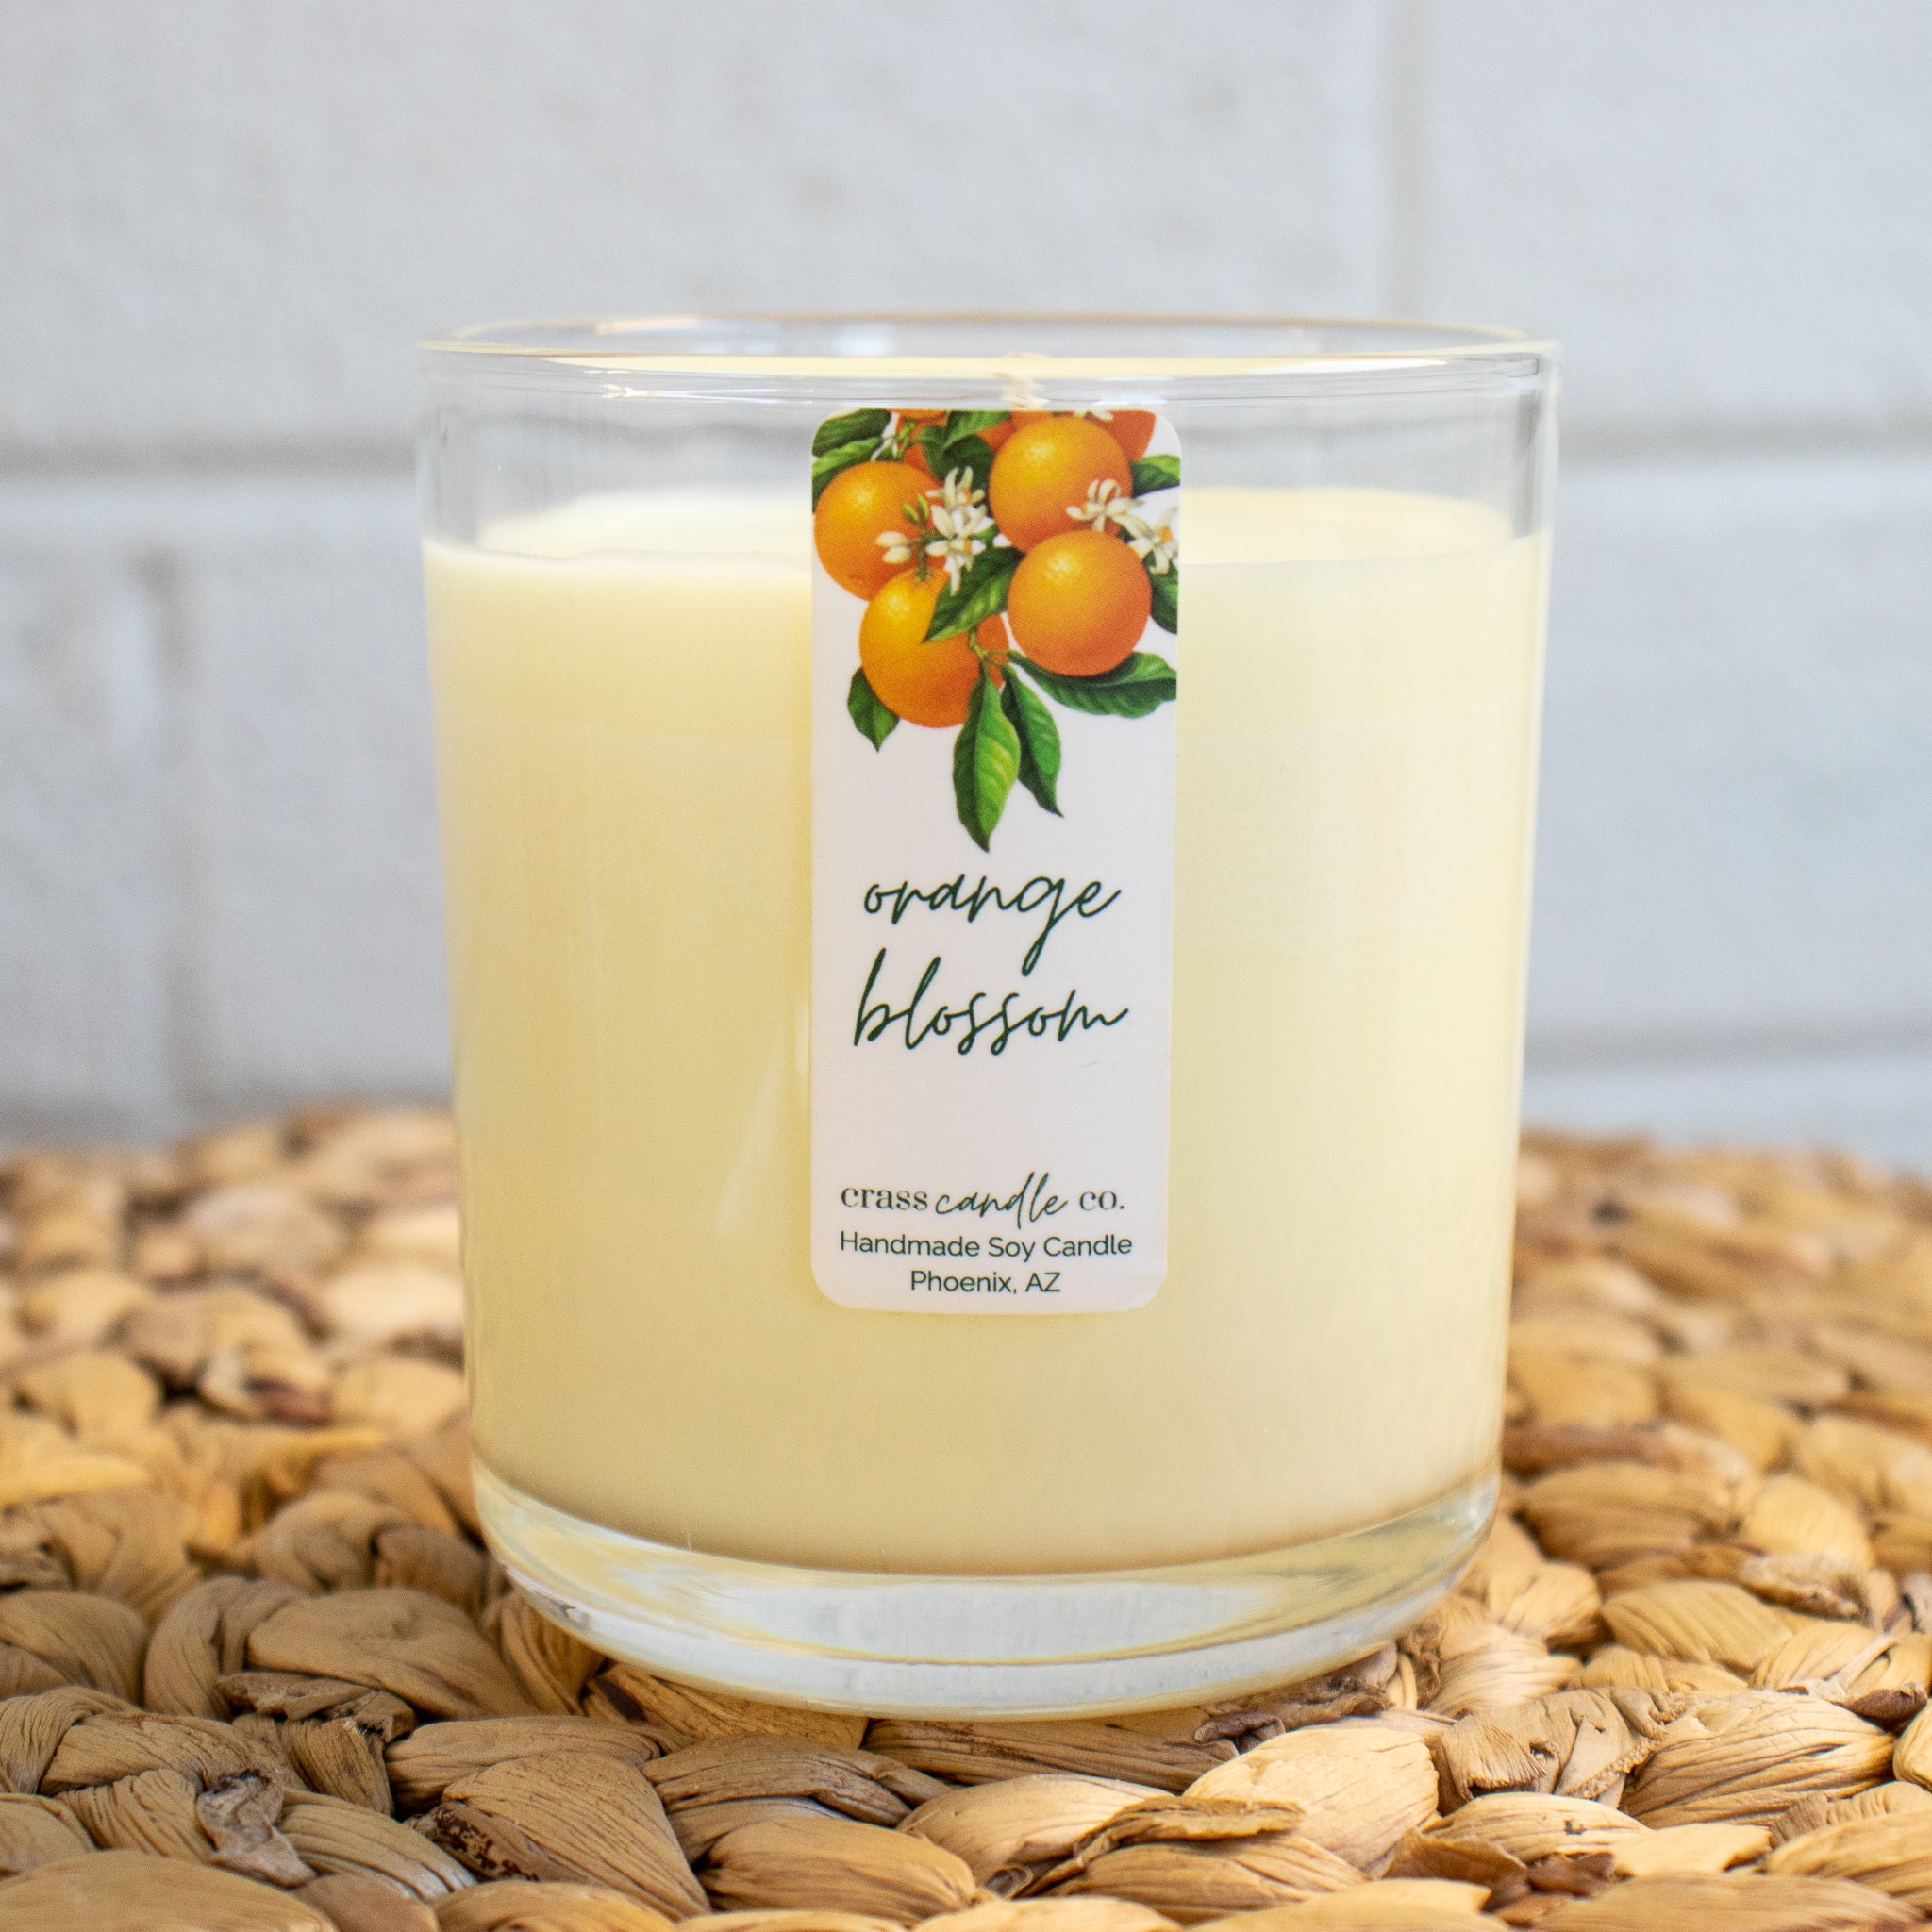 Cactus Blossom Candle Review — How This Smells